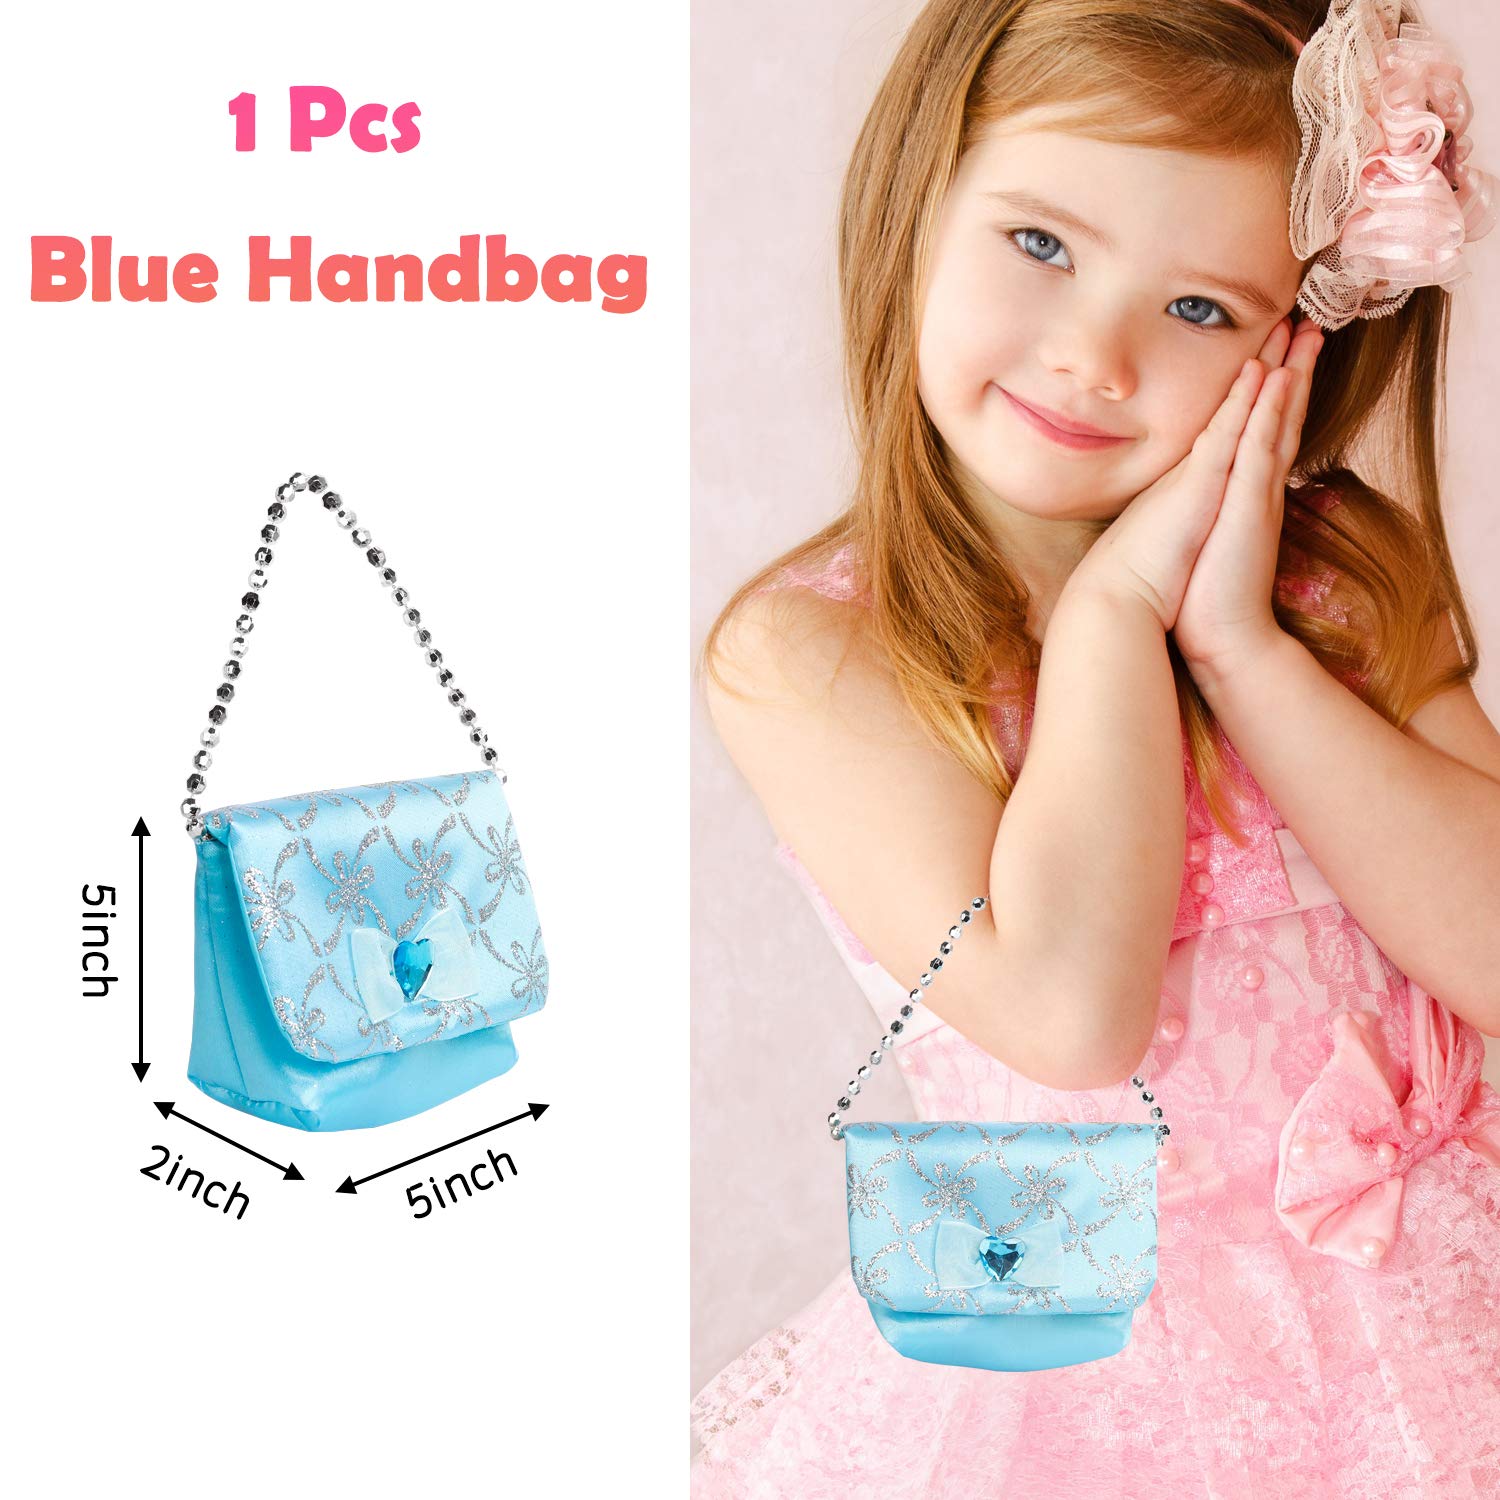 WATINC 42Pcs Princess Pretend Jewelry Toy Girl’s Jewelry Dress Up Play Set Included Blue Shiny Handbag Necklaces Adjustable Diamond Rings Bracelets for Little Girls Simulation Toy